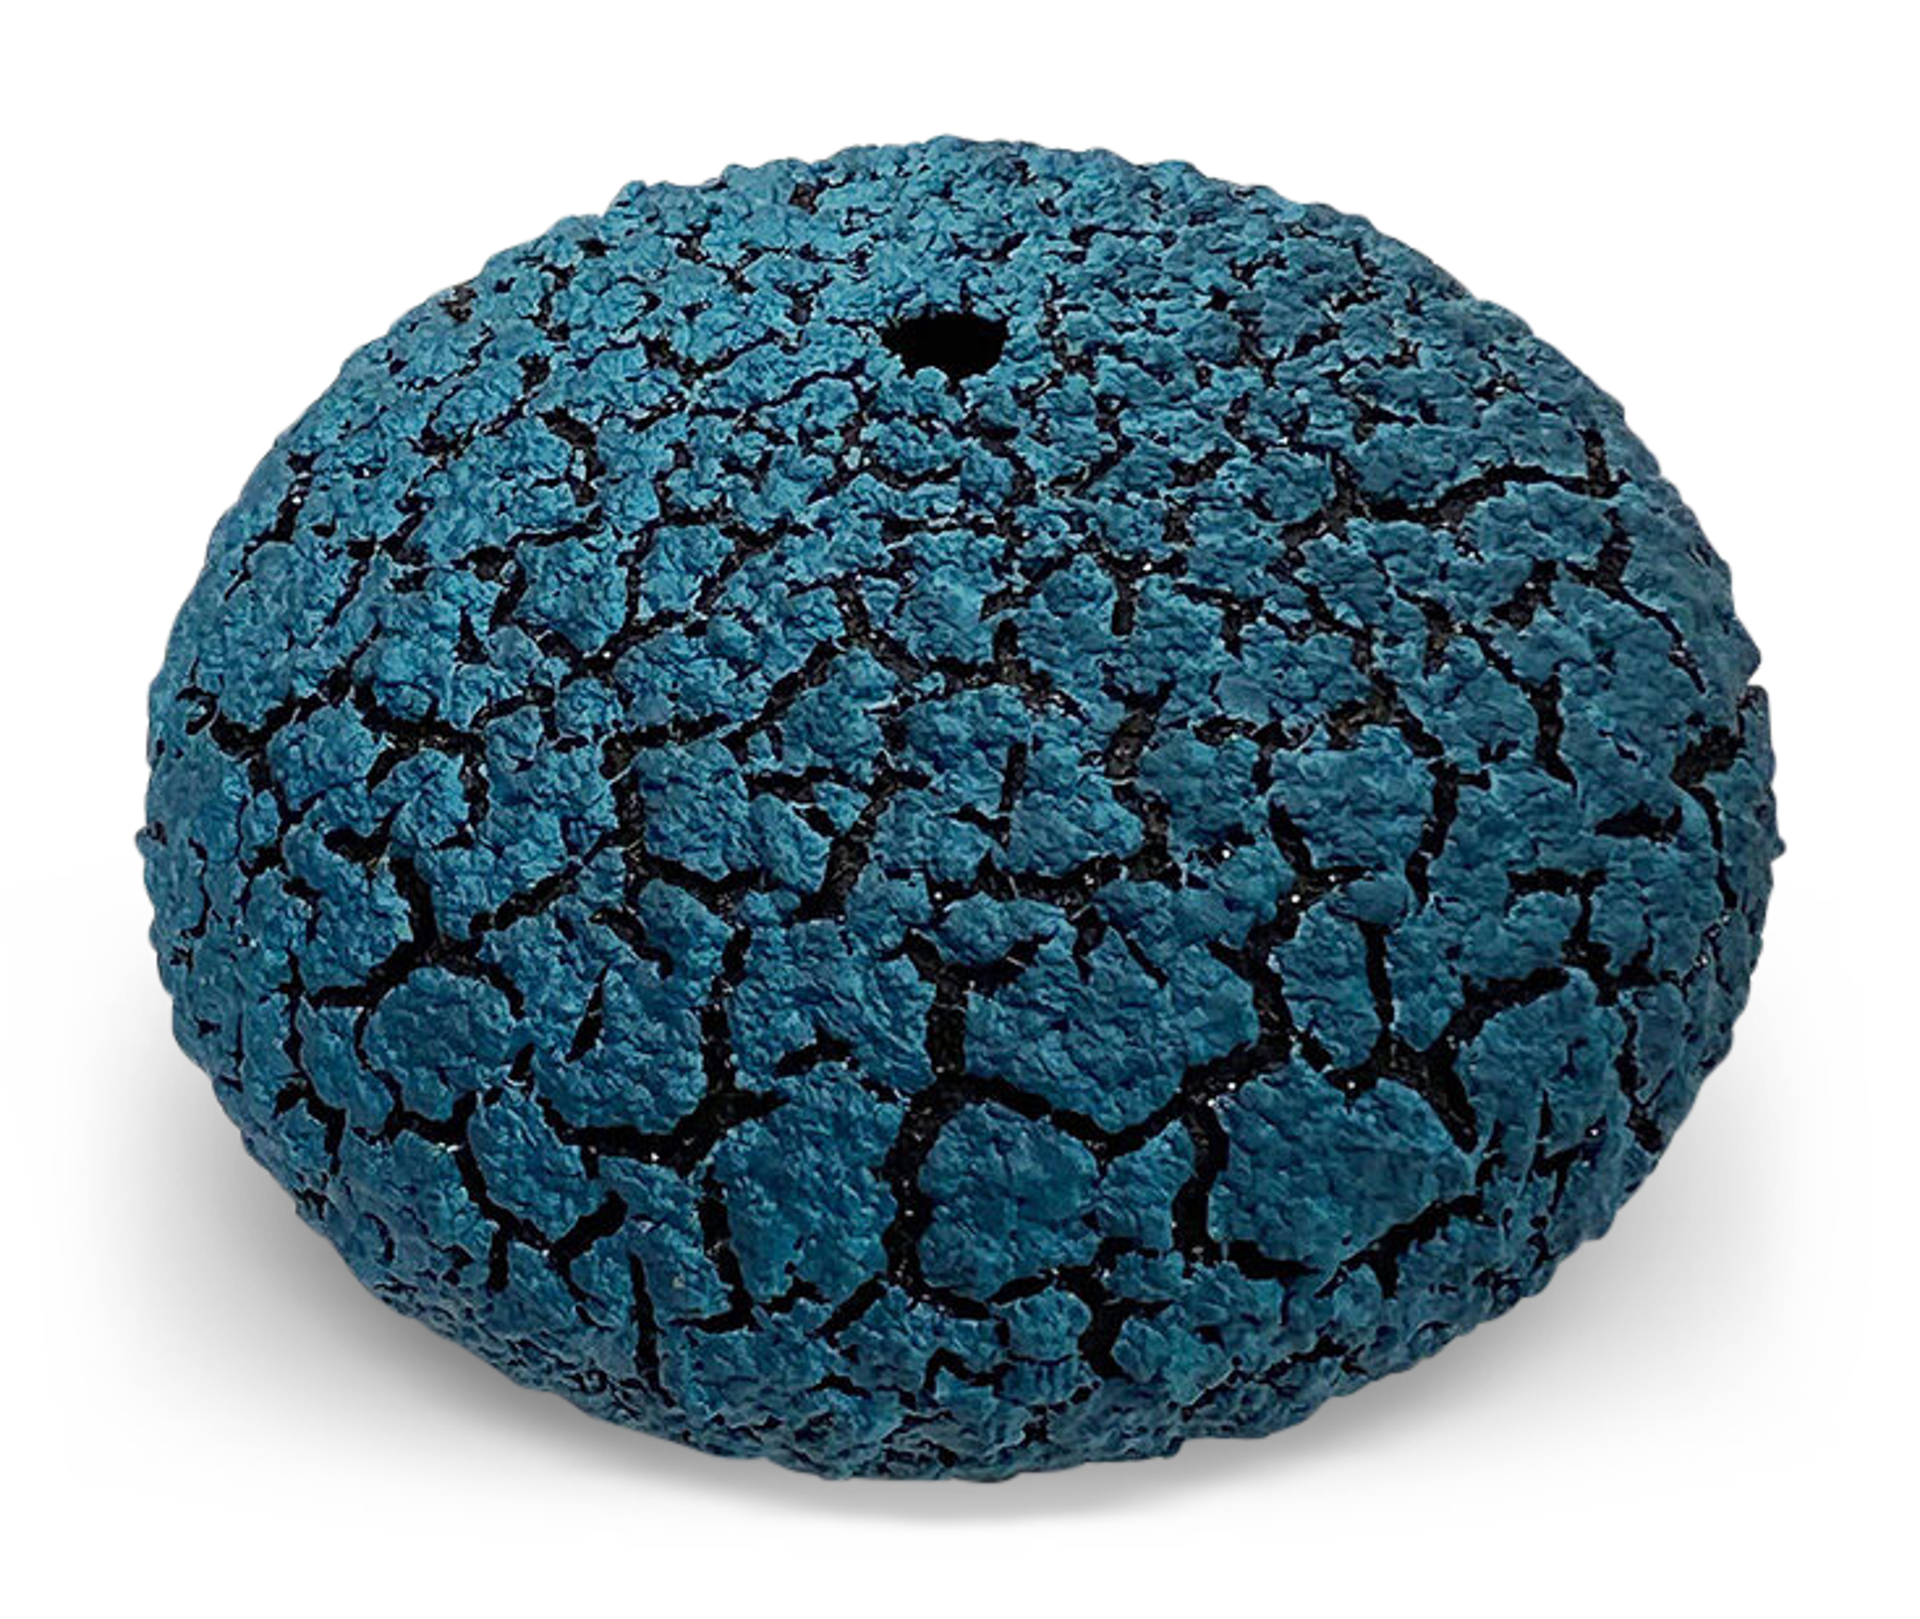 Urchin Vessel ~ Turquoise Green/Peacock Blue (Other colors can be ordered) by Randy O'Brien